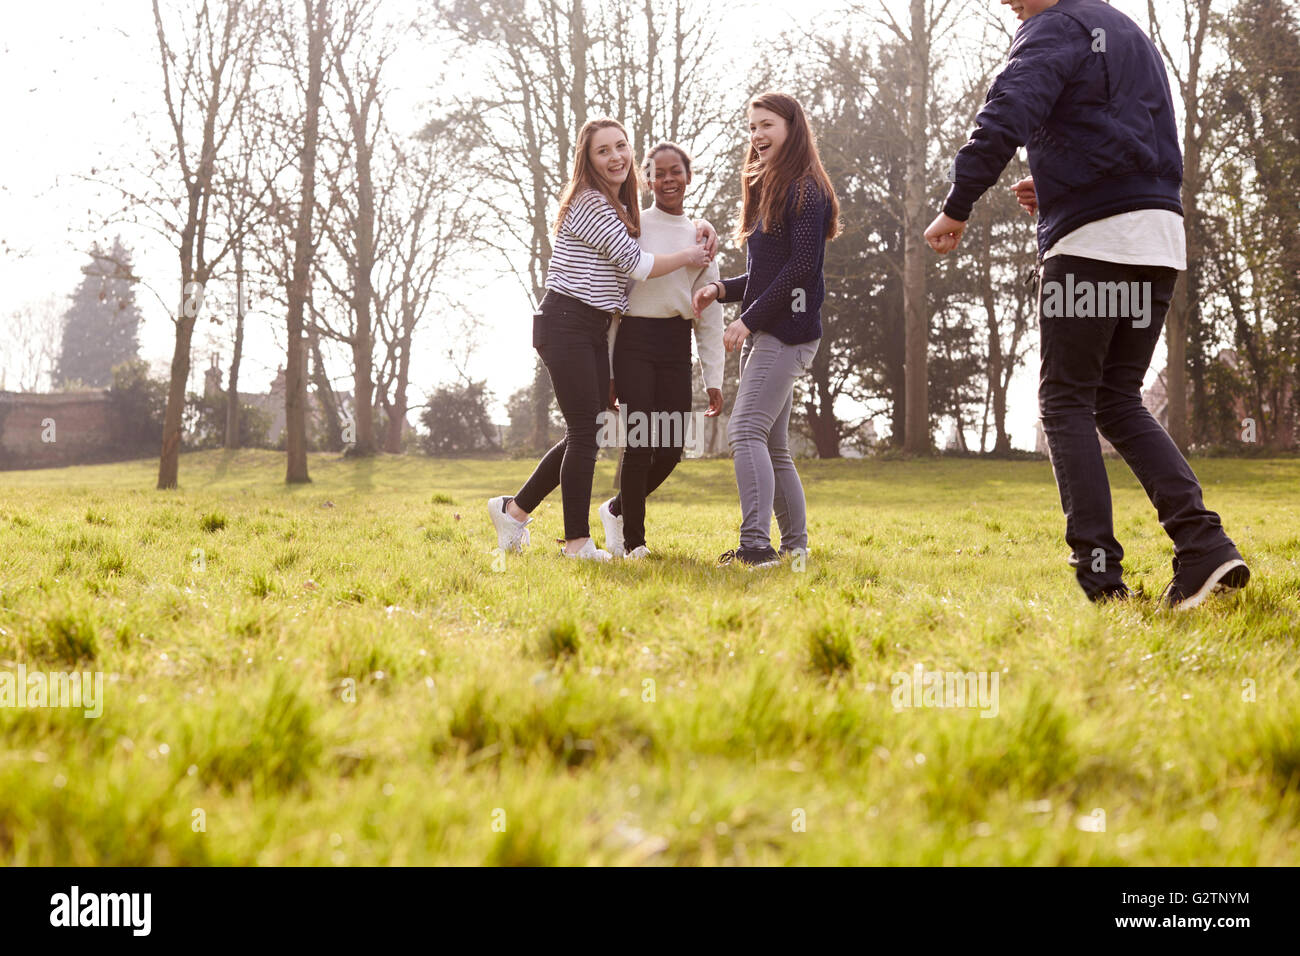 Group Of Teenagers Playing Soccer In Park Together Stock Photo